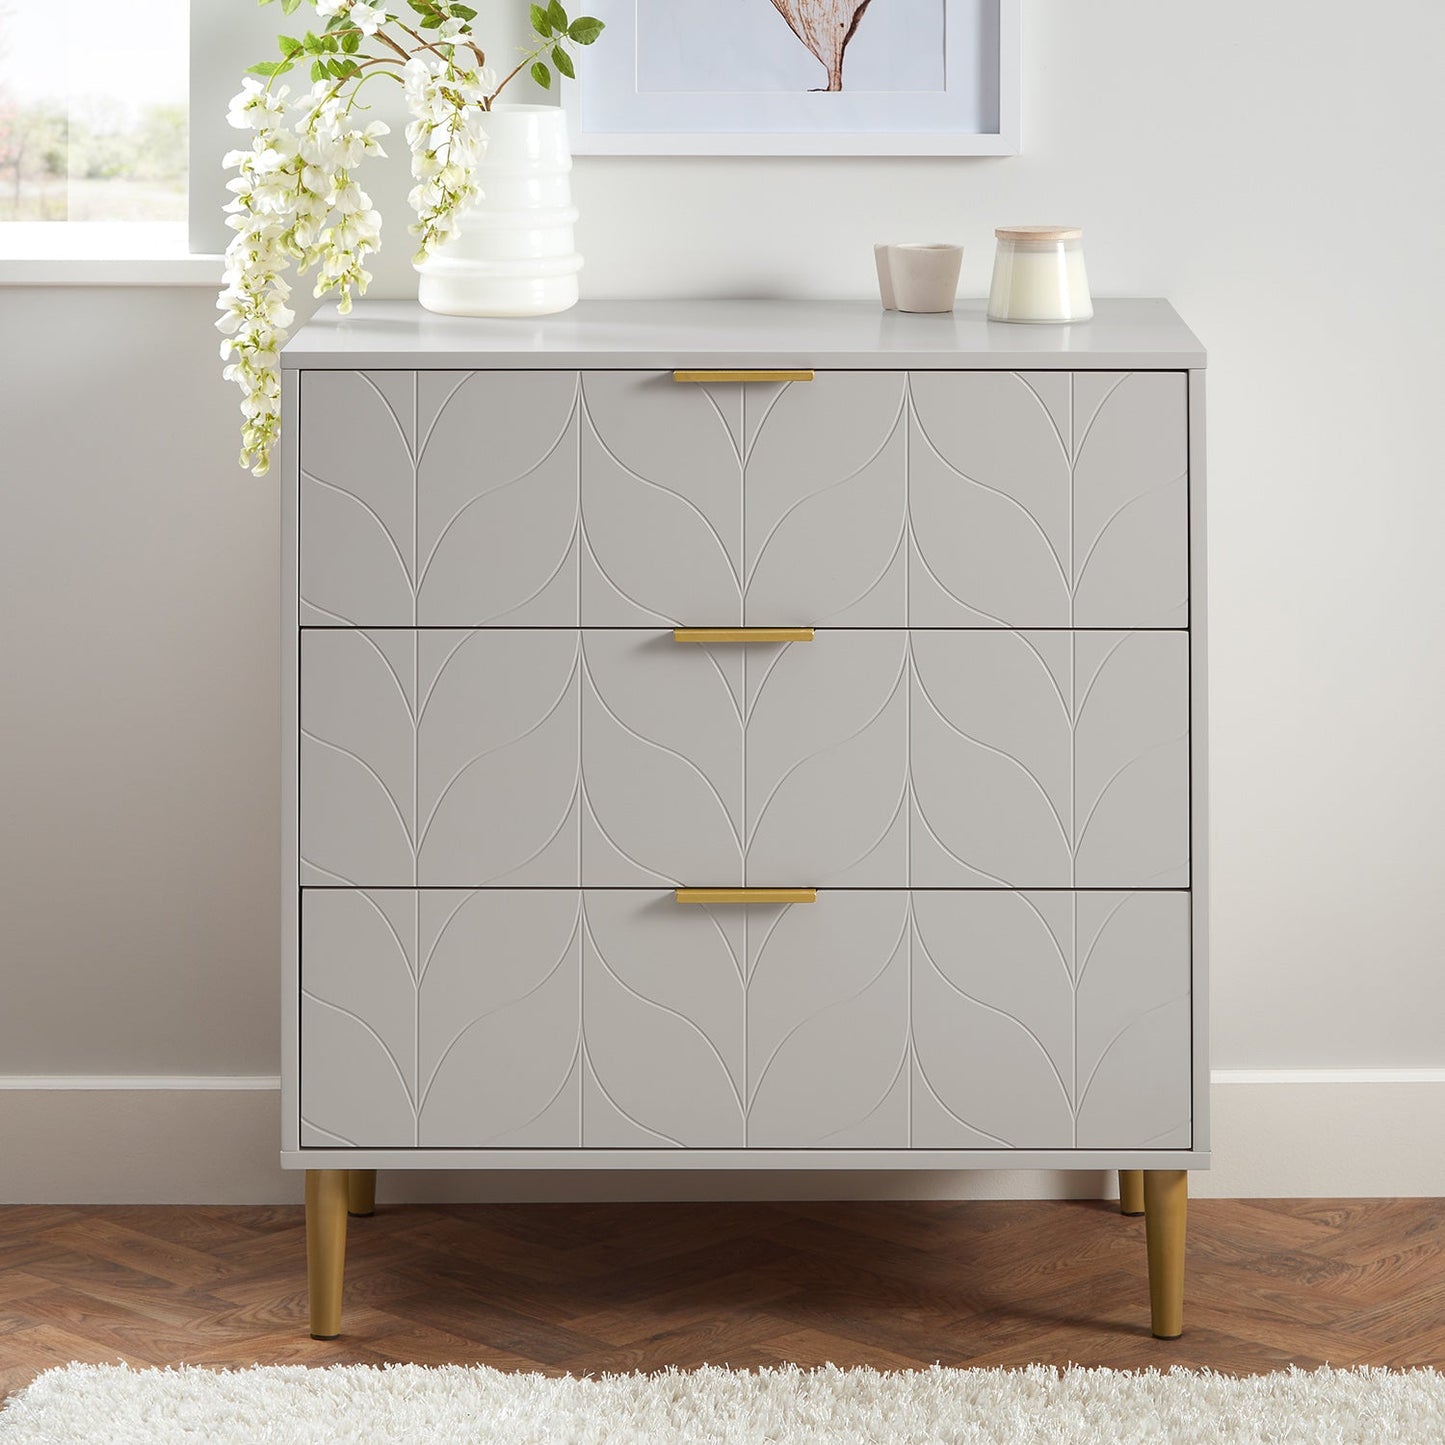 Gloria 4 piece bedroom furniture set - 4 over 4 chest of drawers -grey - Laura James